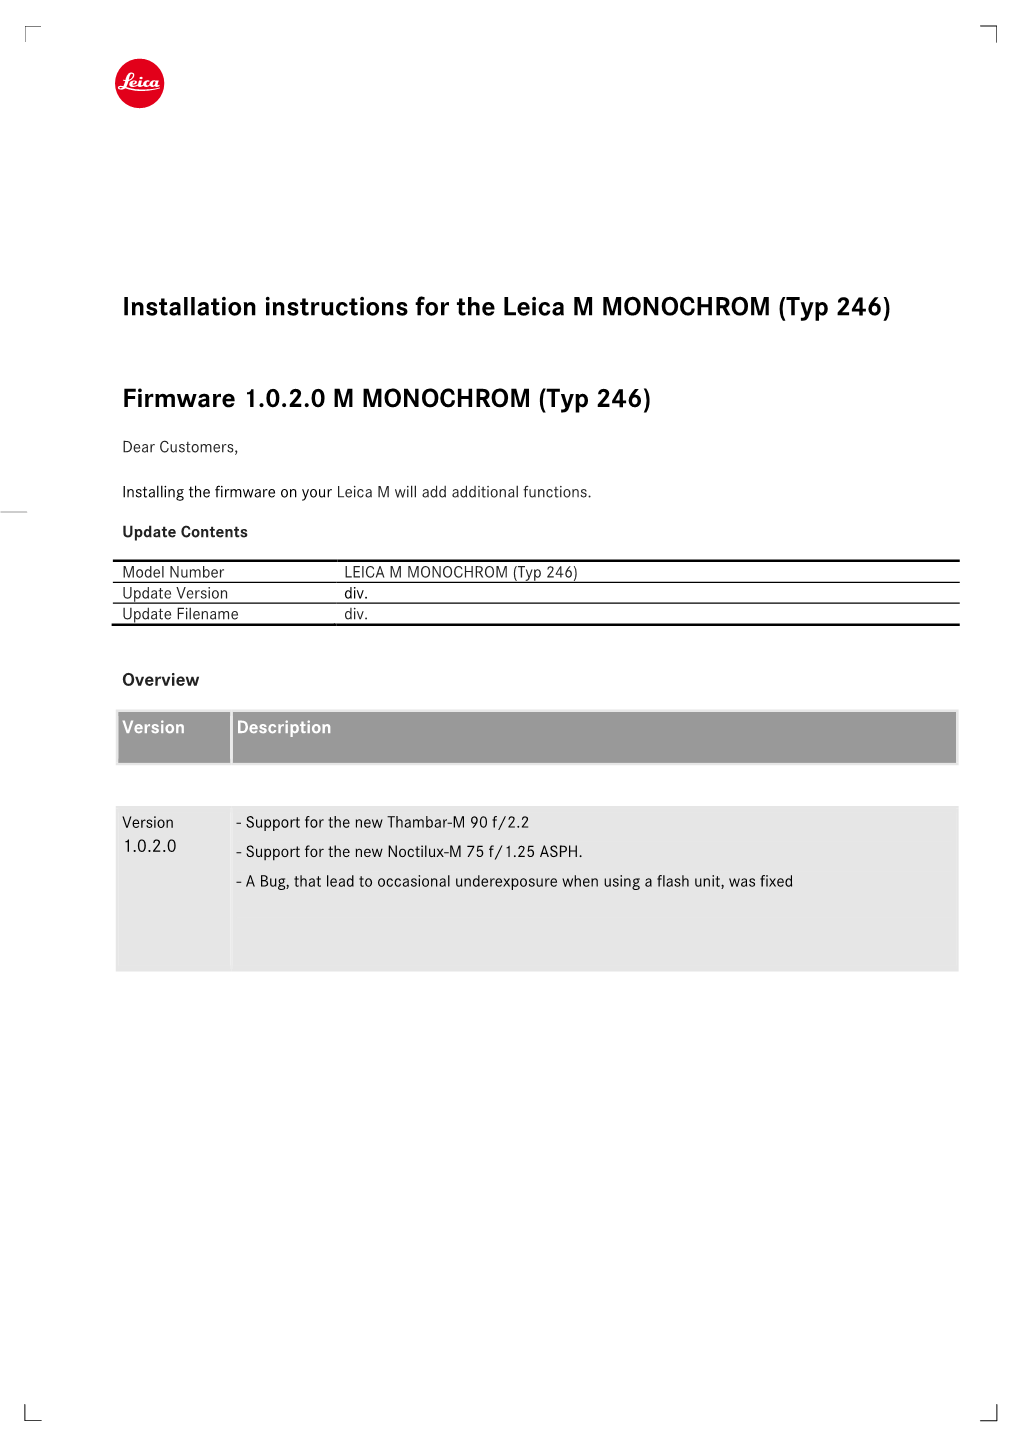 Installation Instructions for the Leica M MONOCHROM (Typ 246)